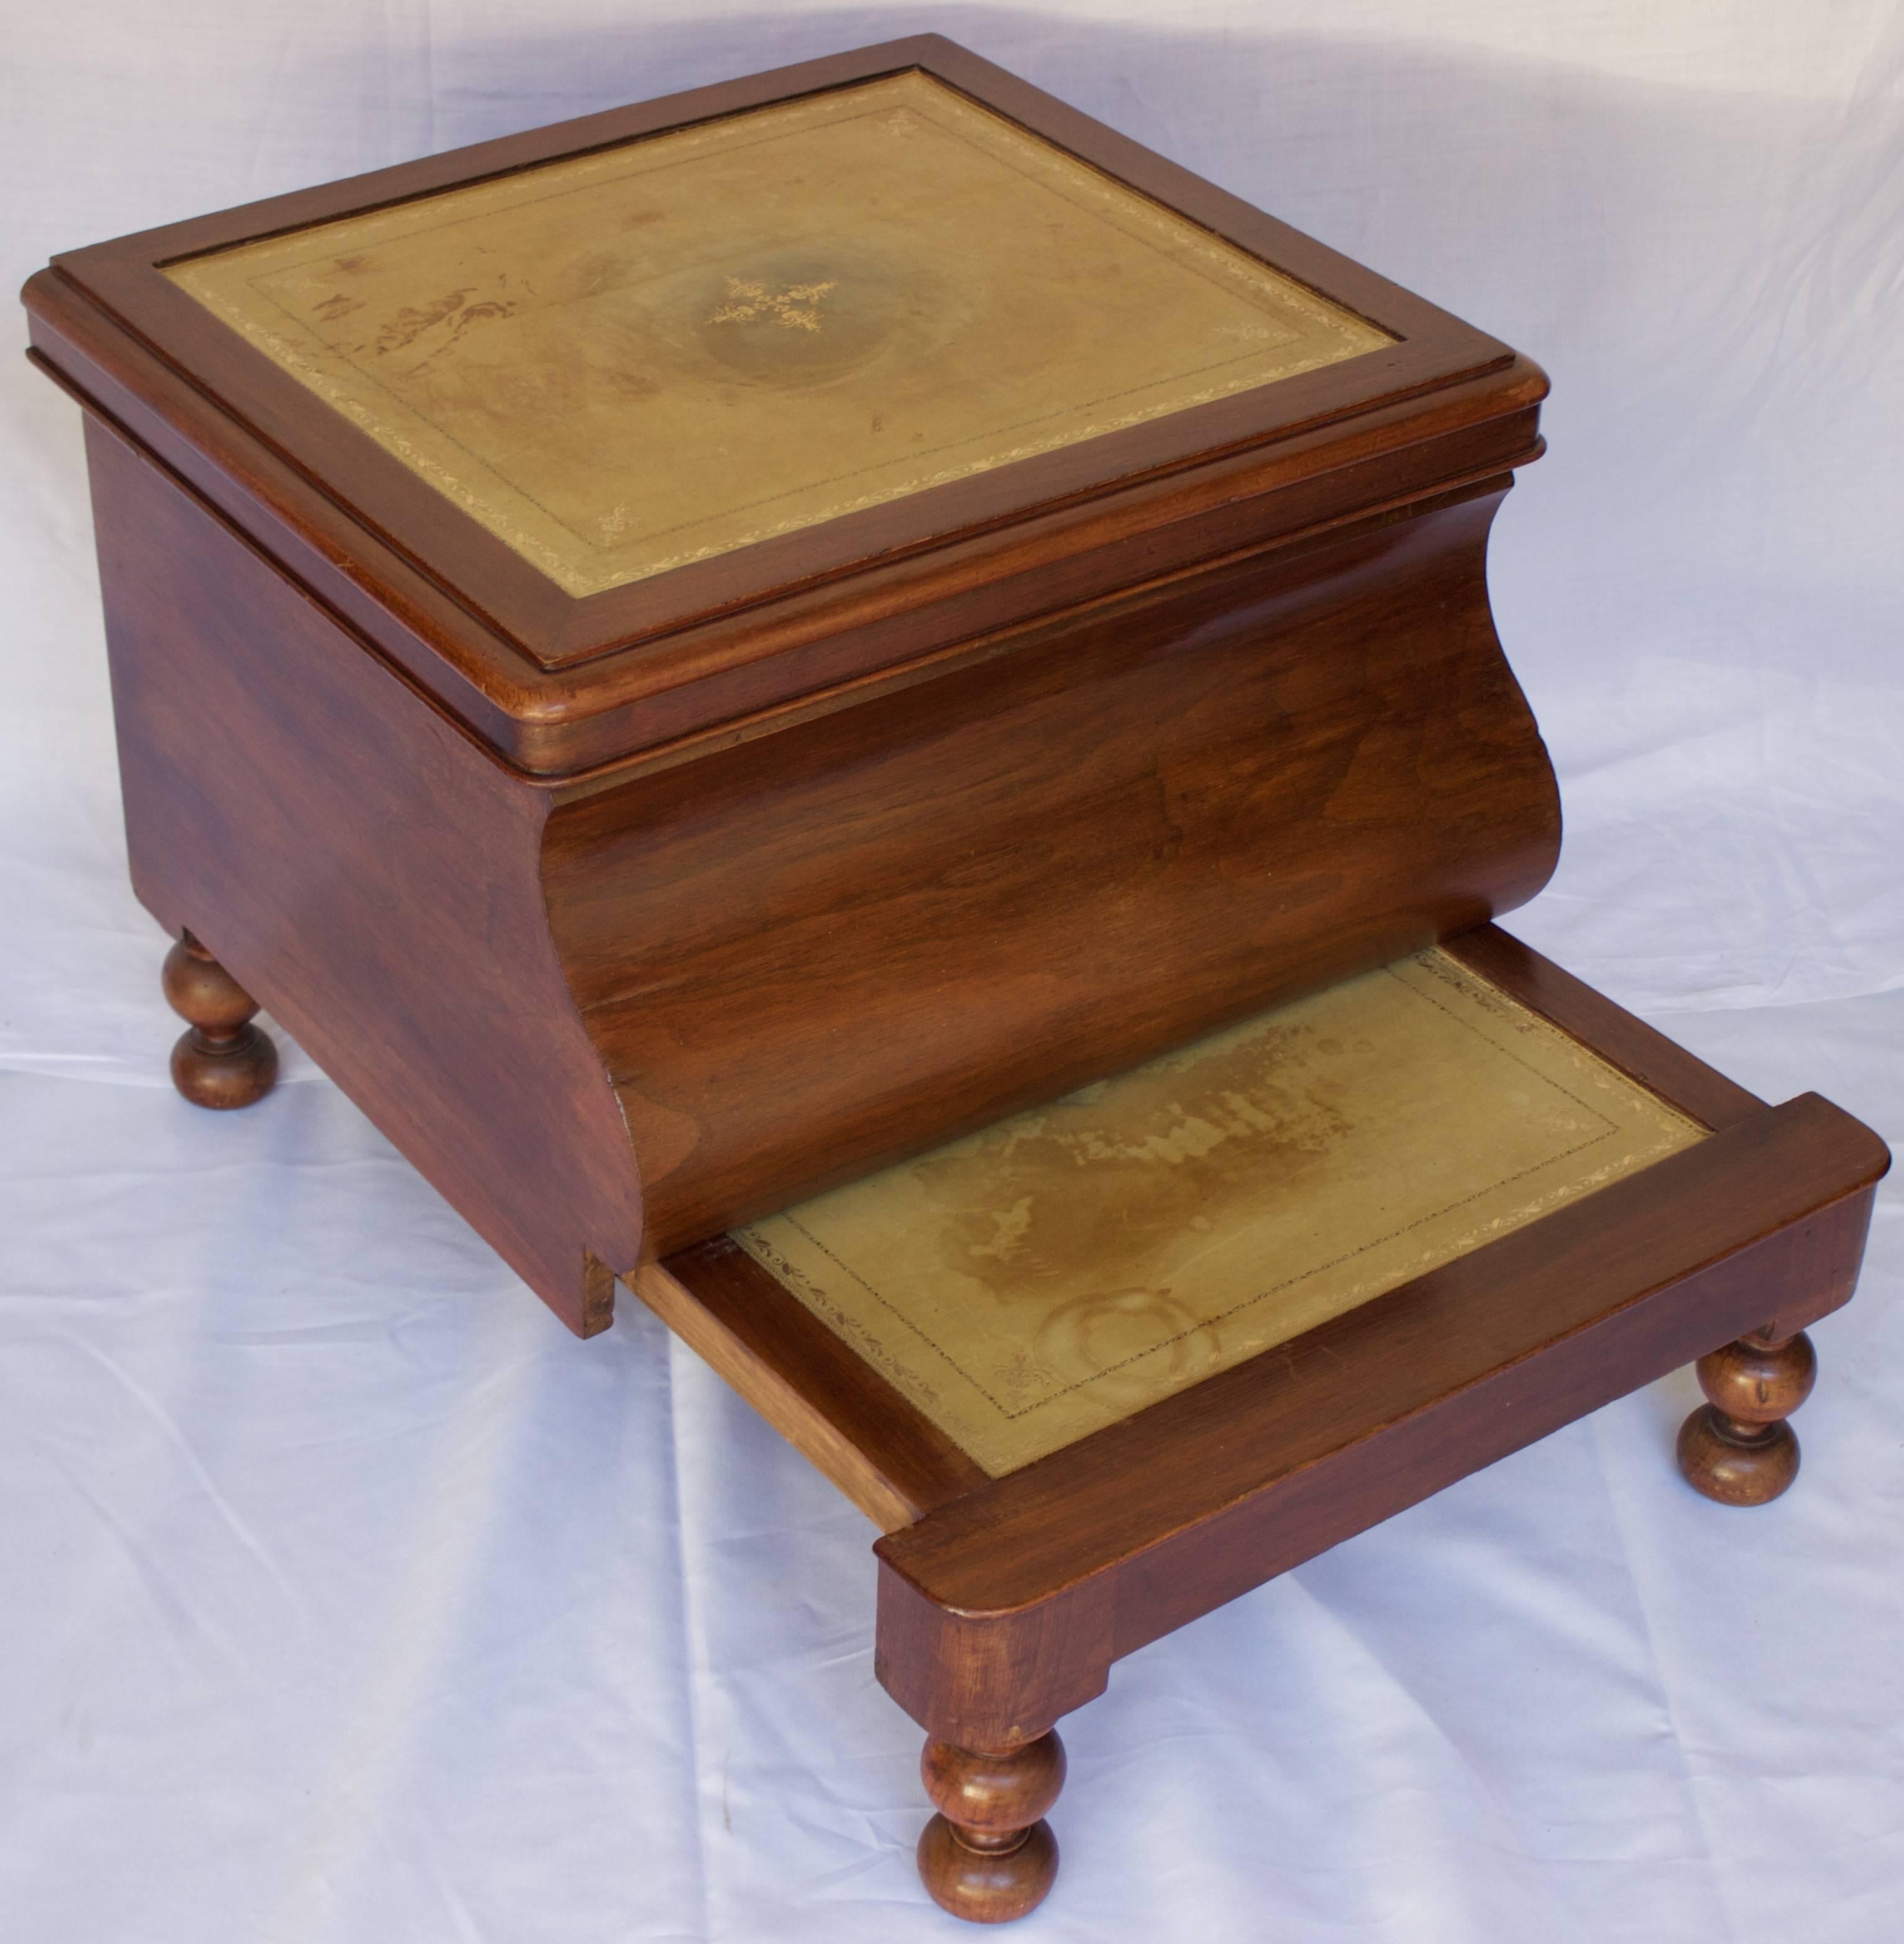 Interesting mahogany veneered Victorian era modified bedside commode with an arched front and four short turned feet. The upper part has been transformed into a chest with an hinged top. The retractable lower part can be used now as a foot stool.